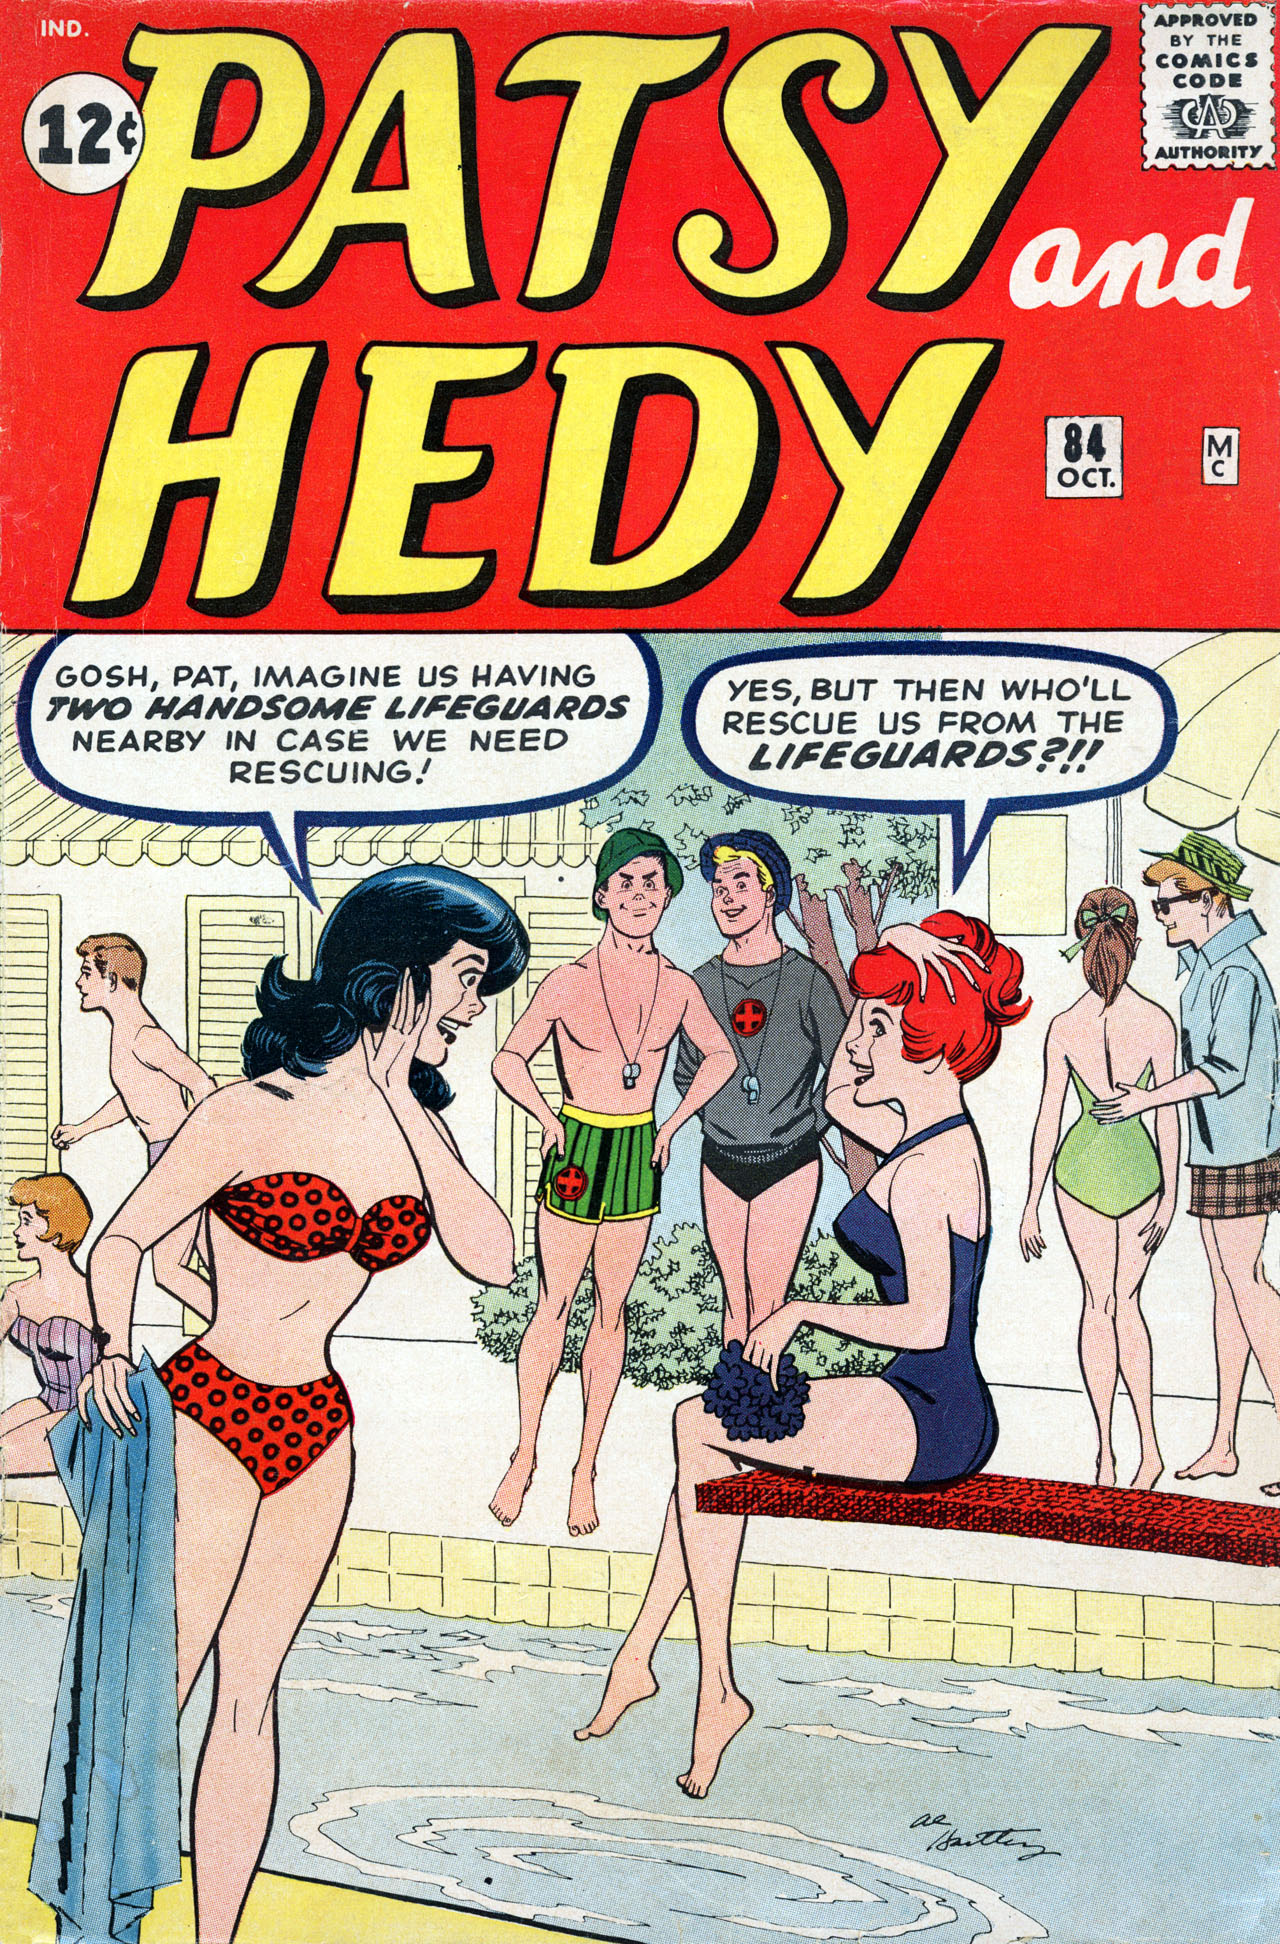 Read online Patsy and Hedy comic -  Issue #84 - 1